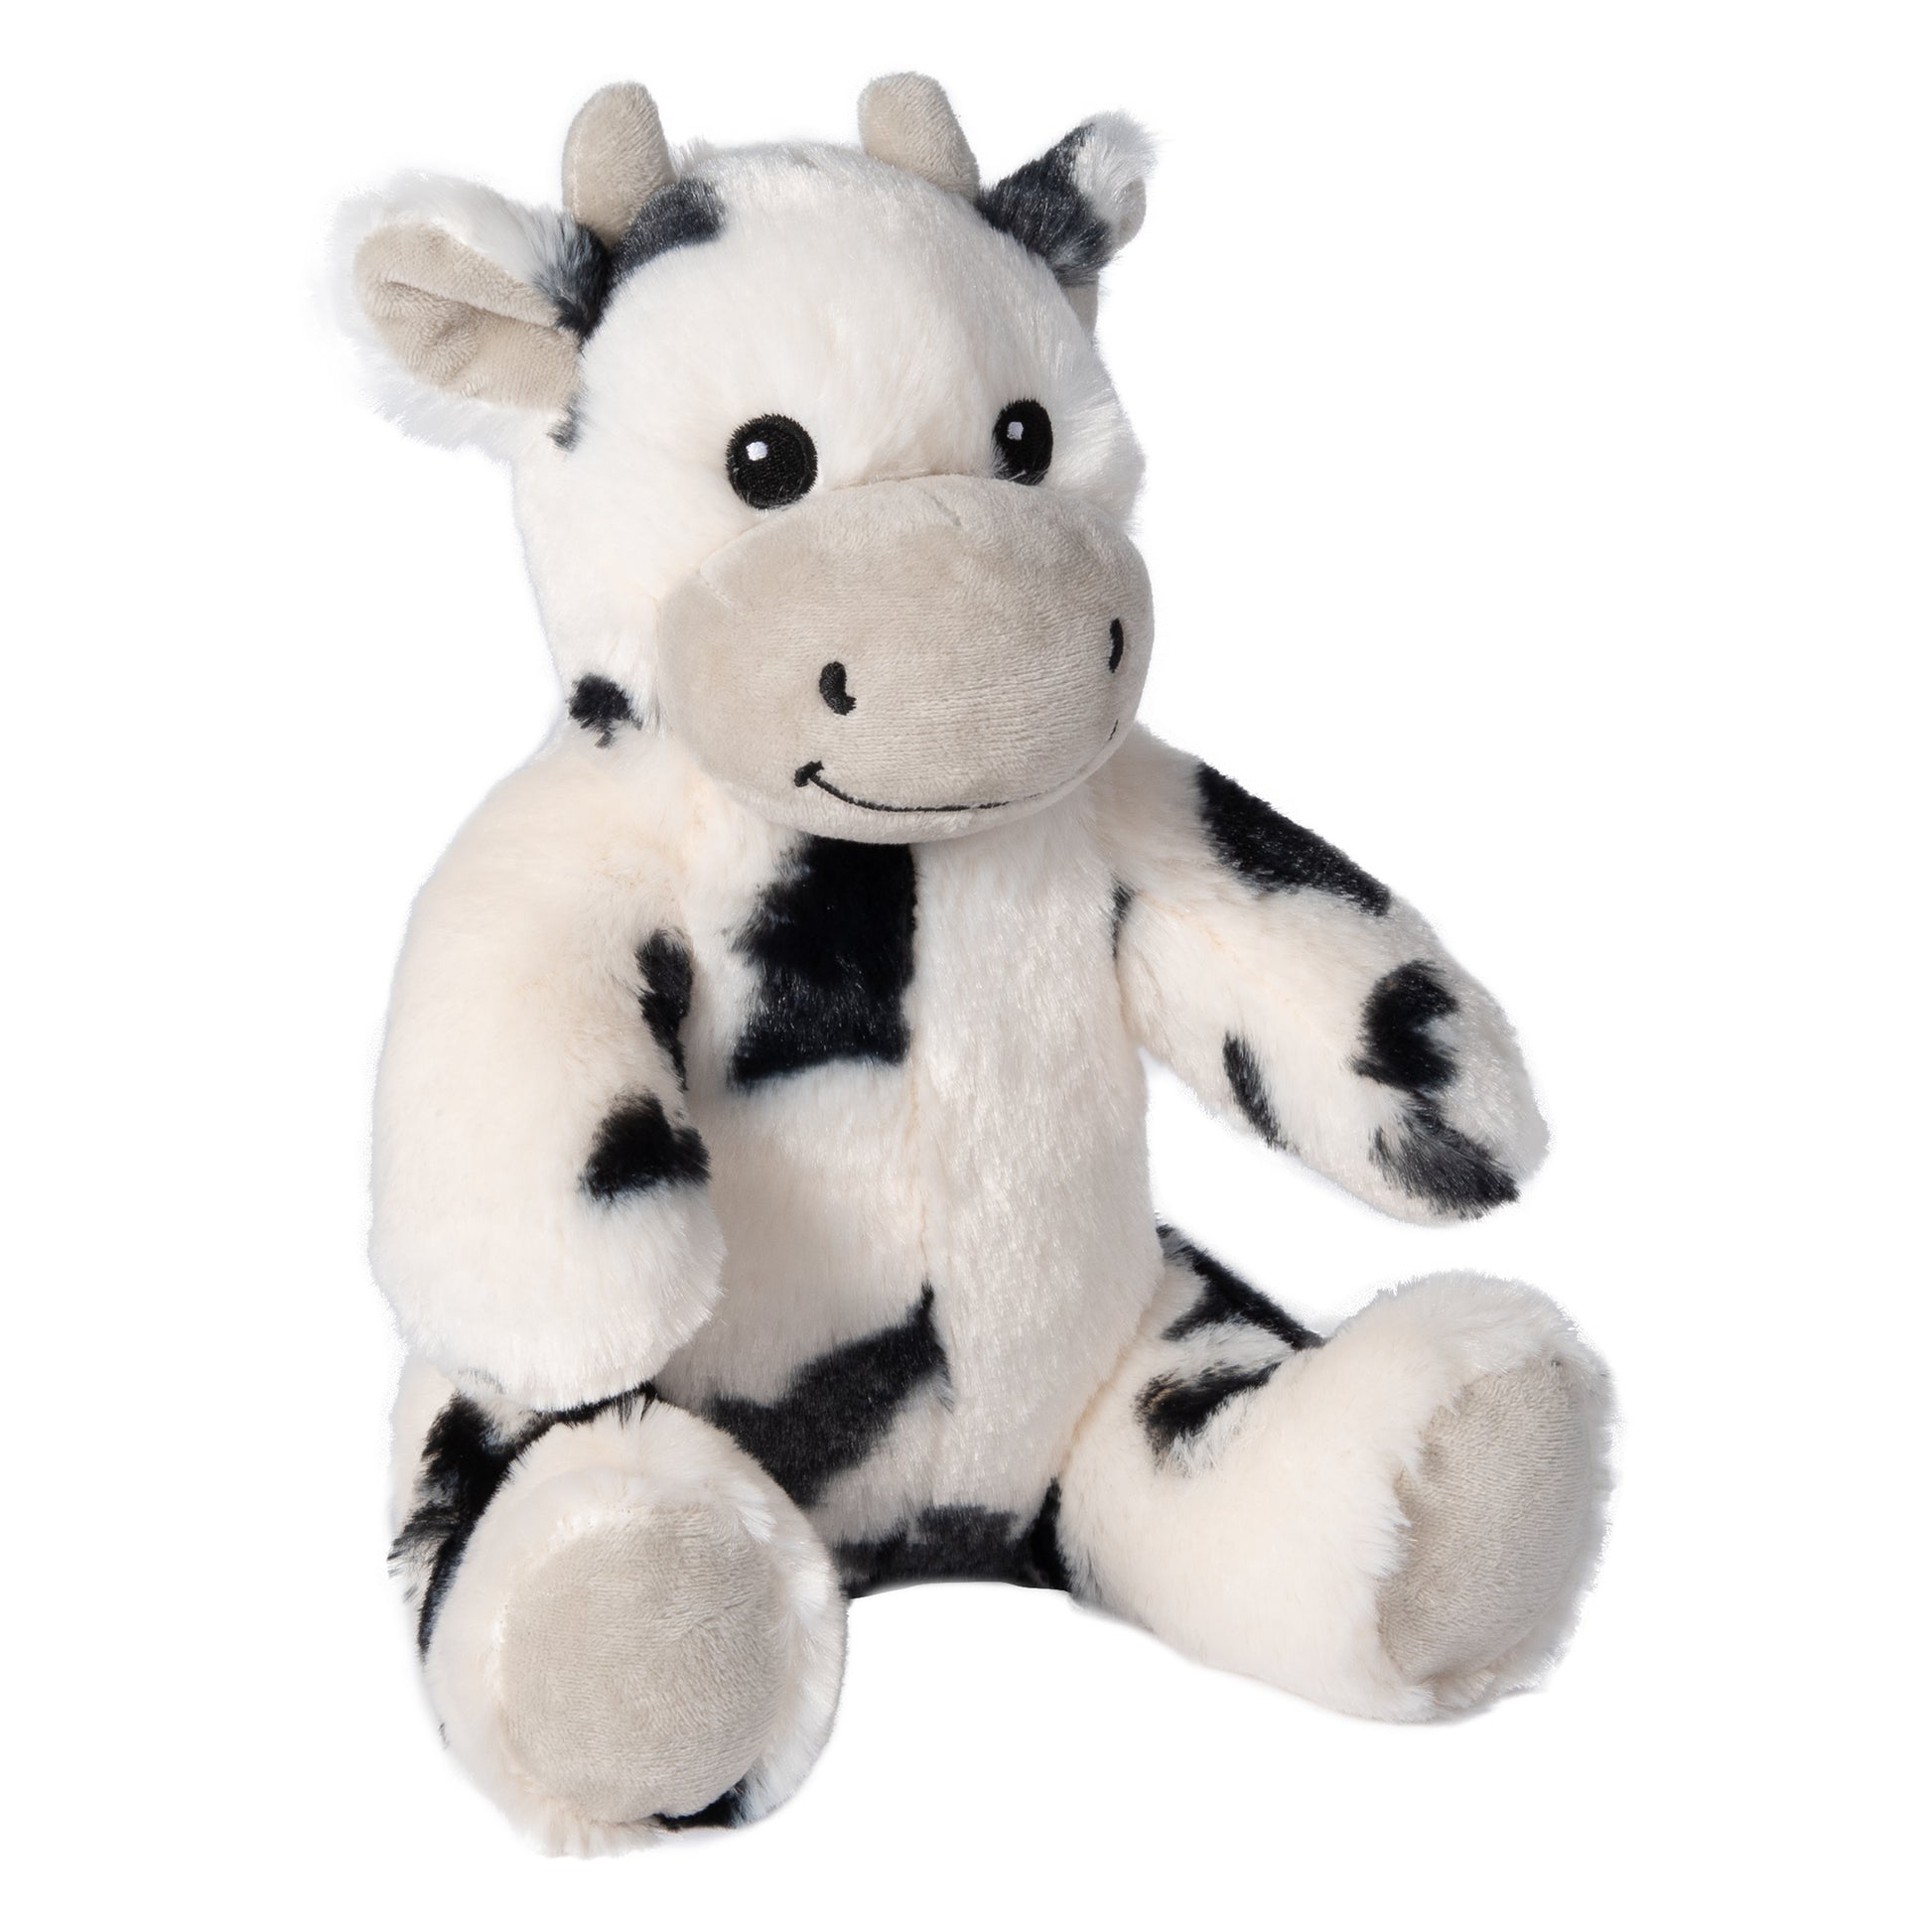 Cow plush toy angled